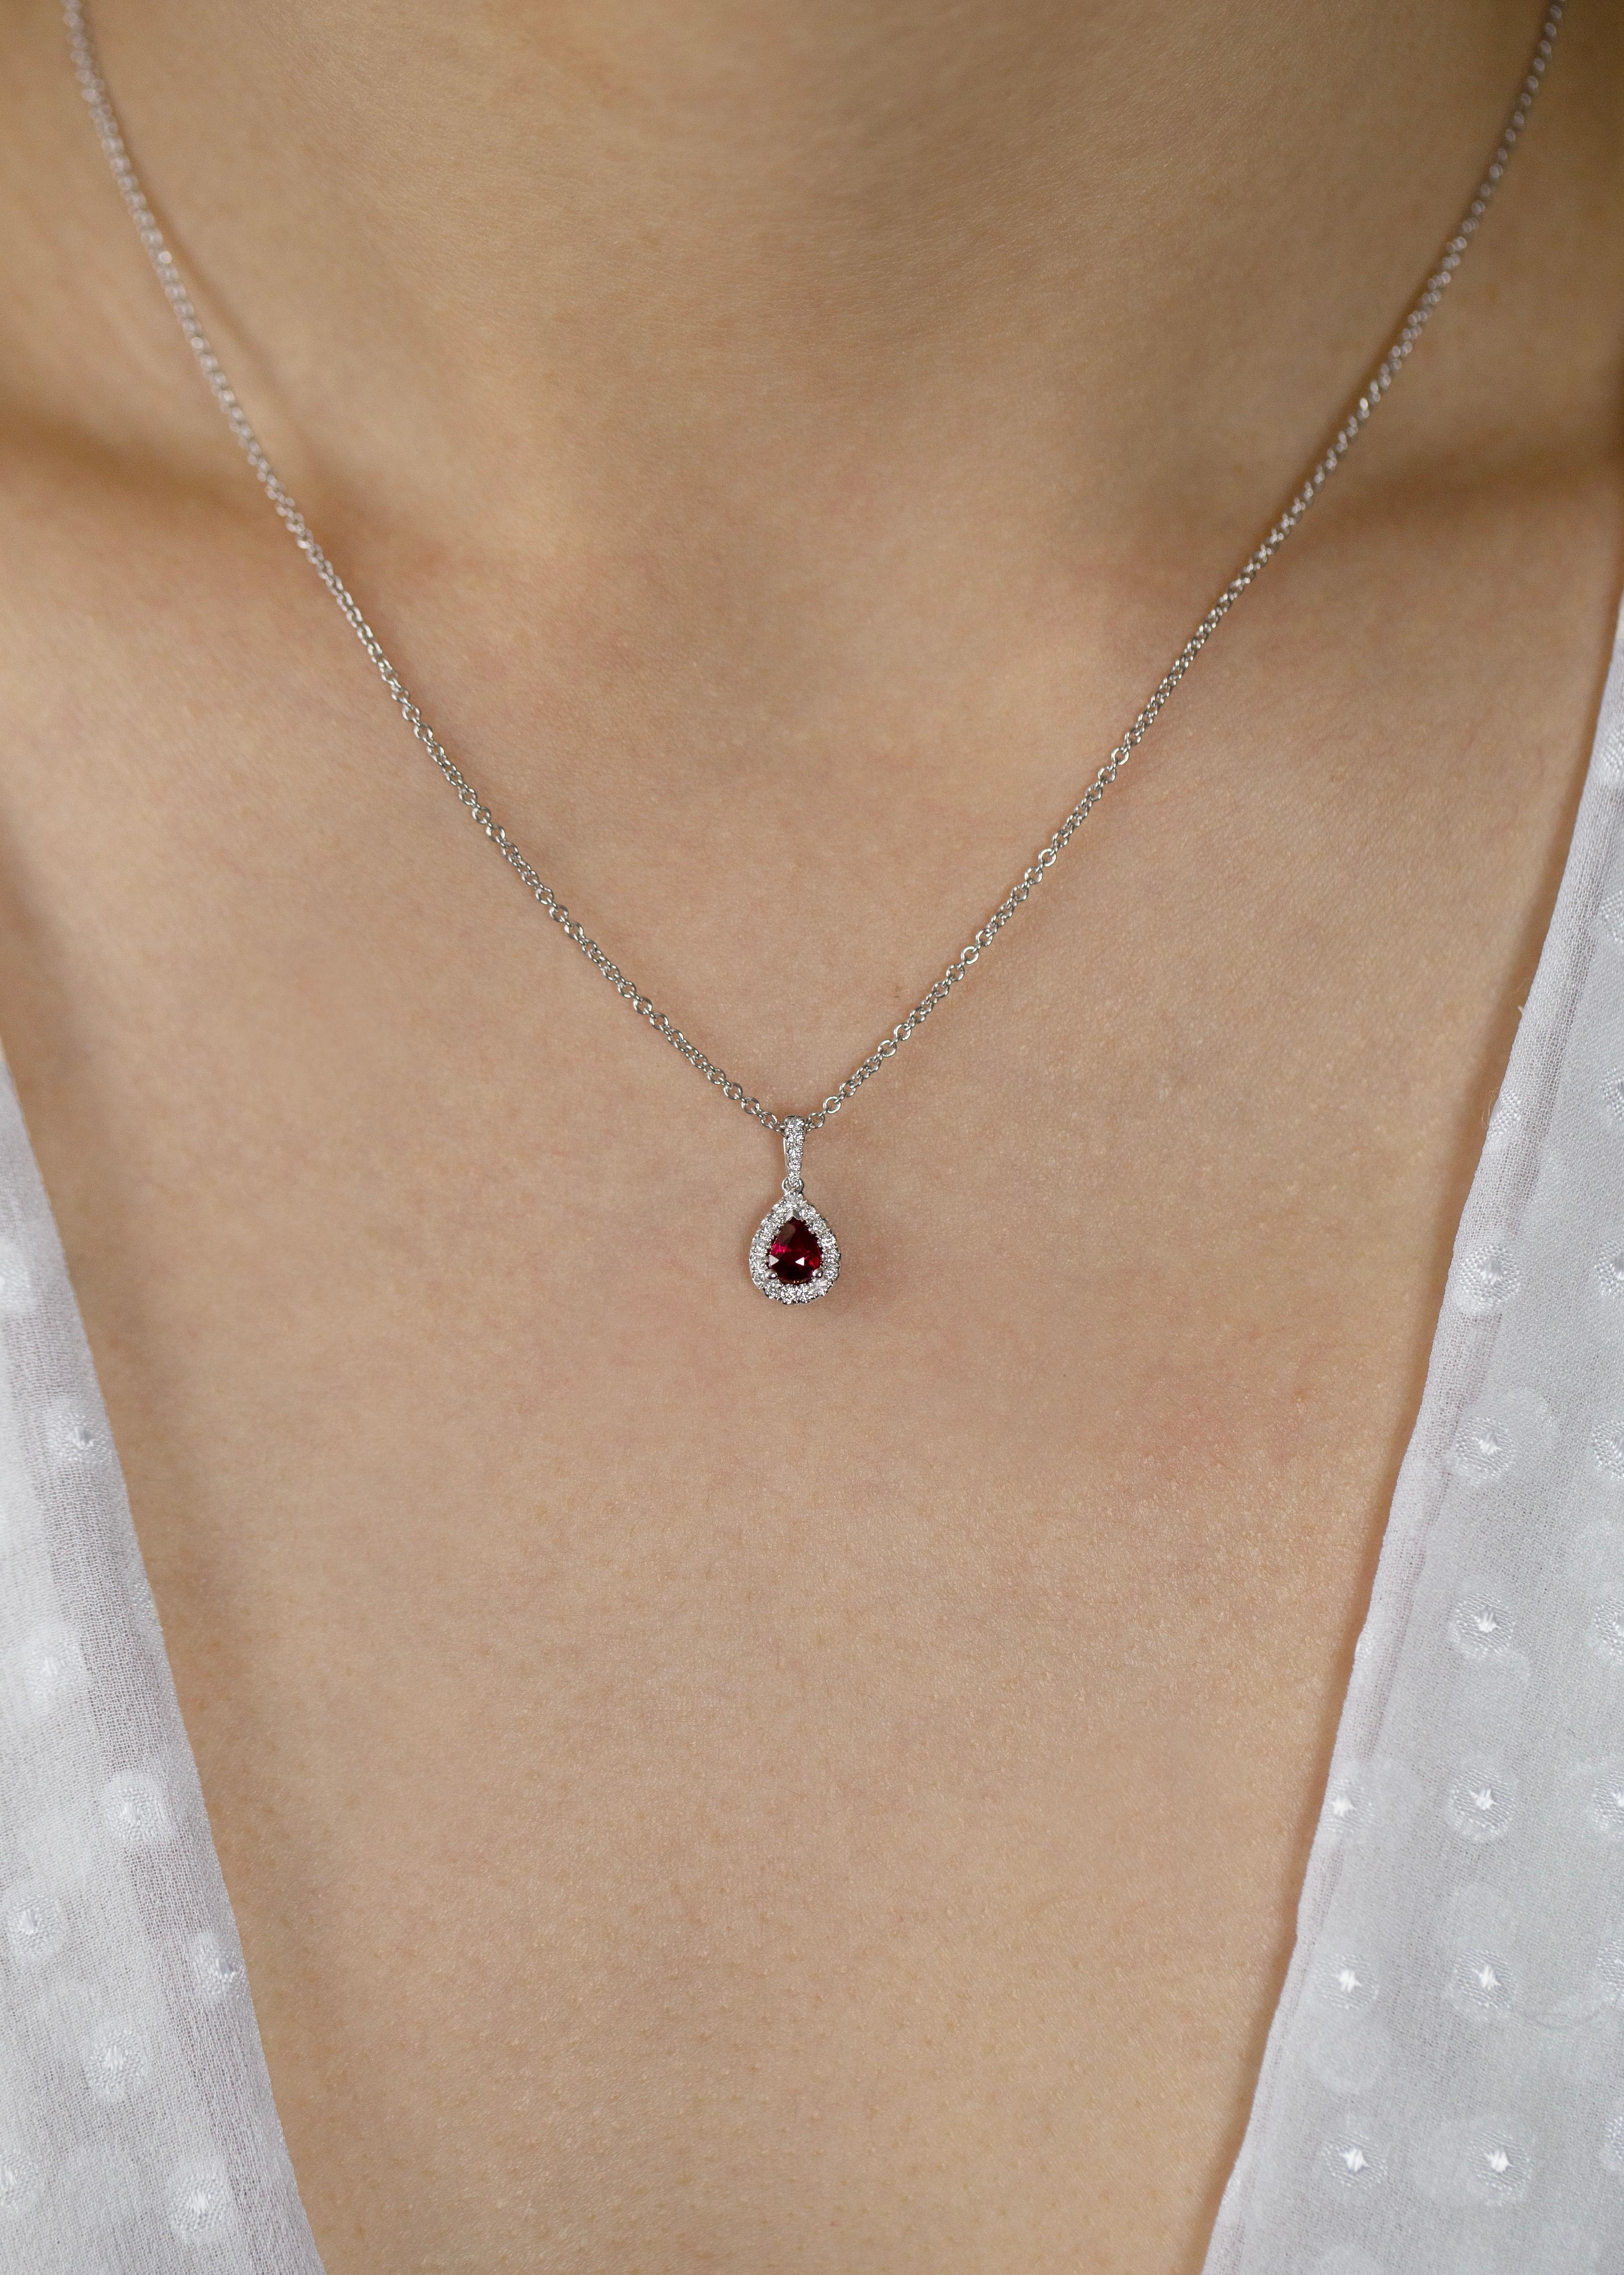 Roman Malakov 0.35 Carat Pear Shape Ruby and Diamond Halo Pendant Necklace In New Condition For Sale In New York, NY